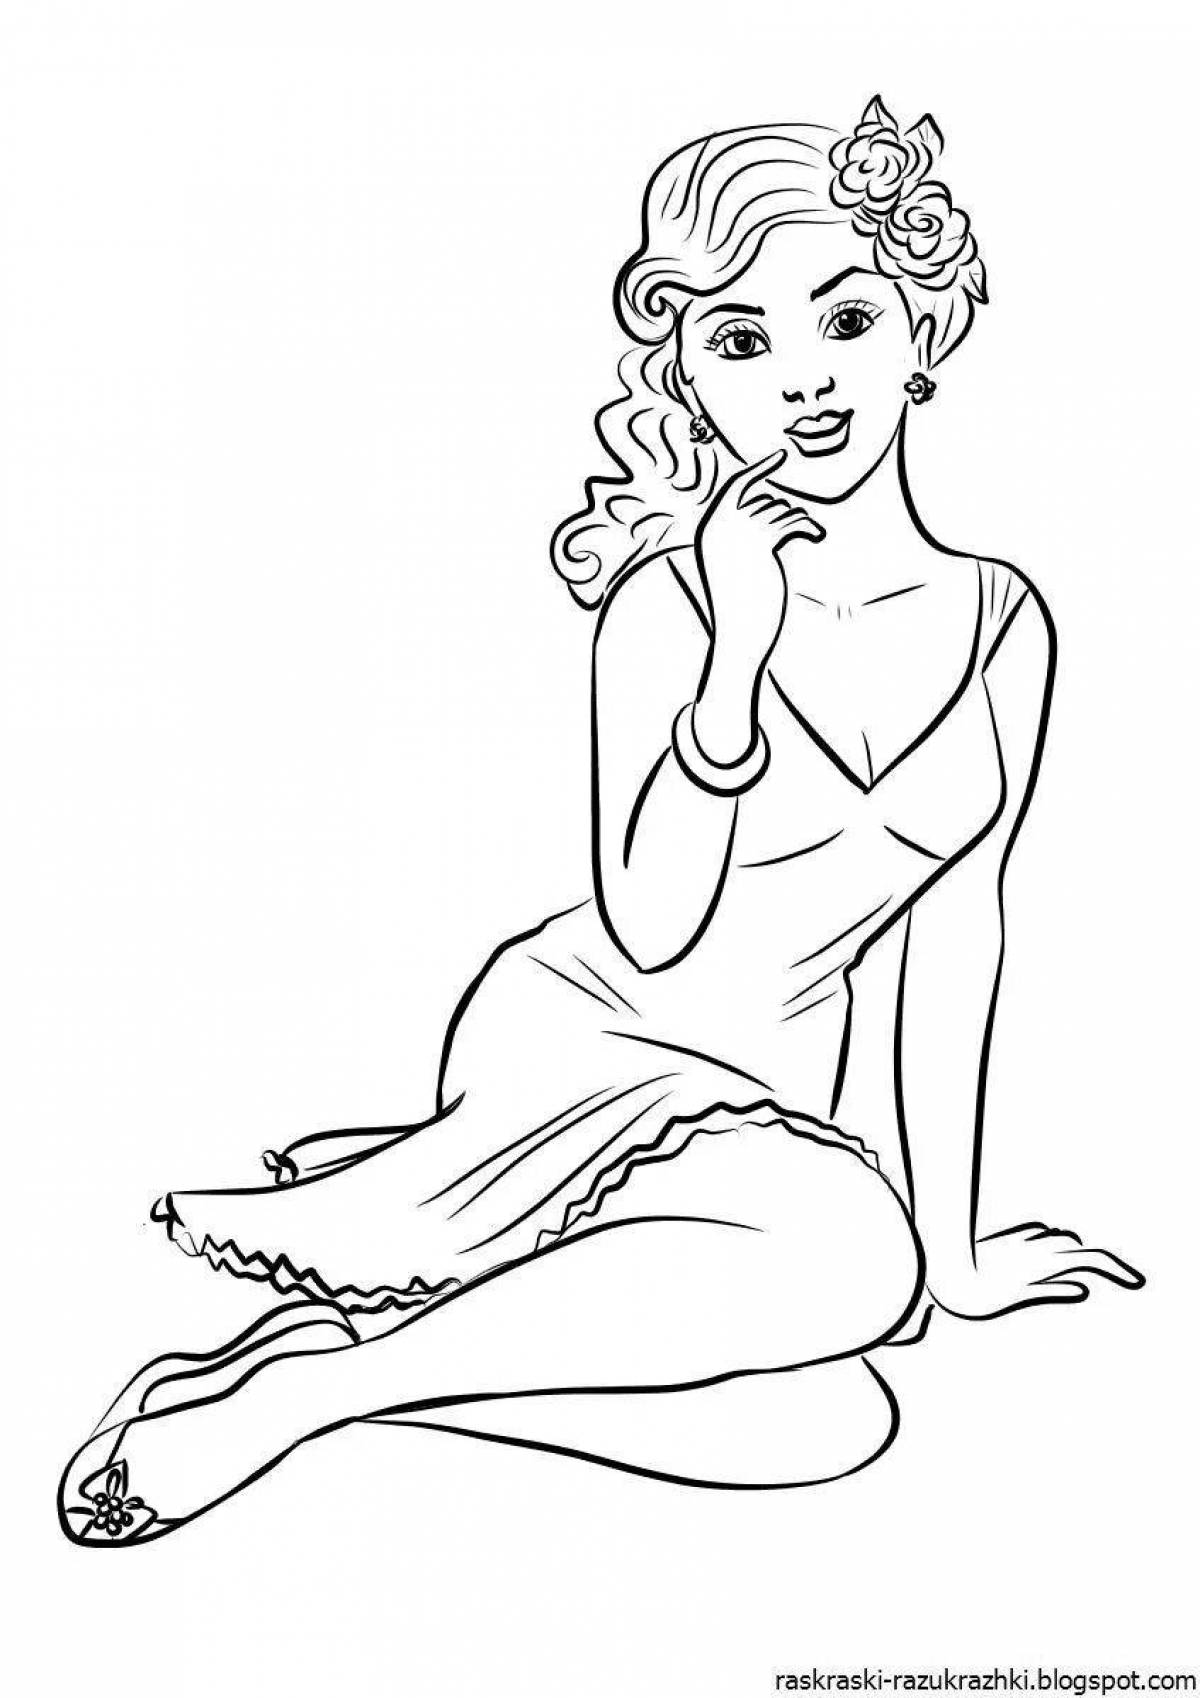 Exquisite coloring book for women